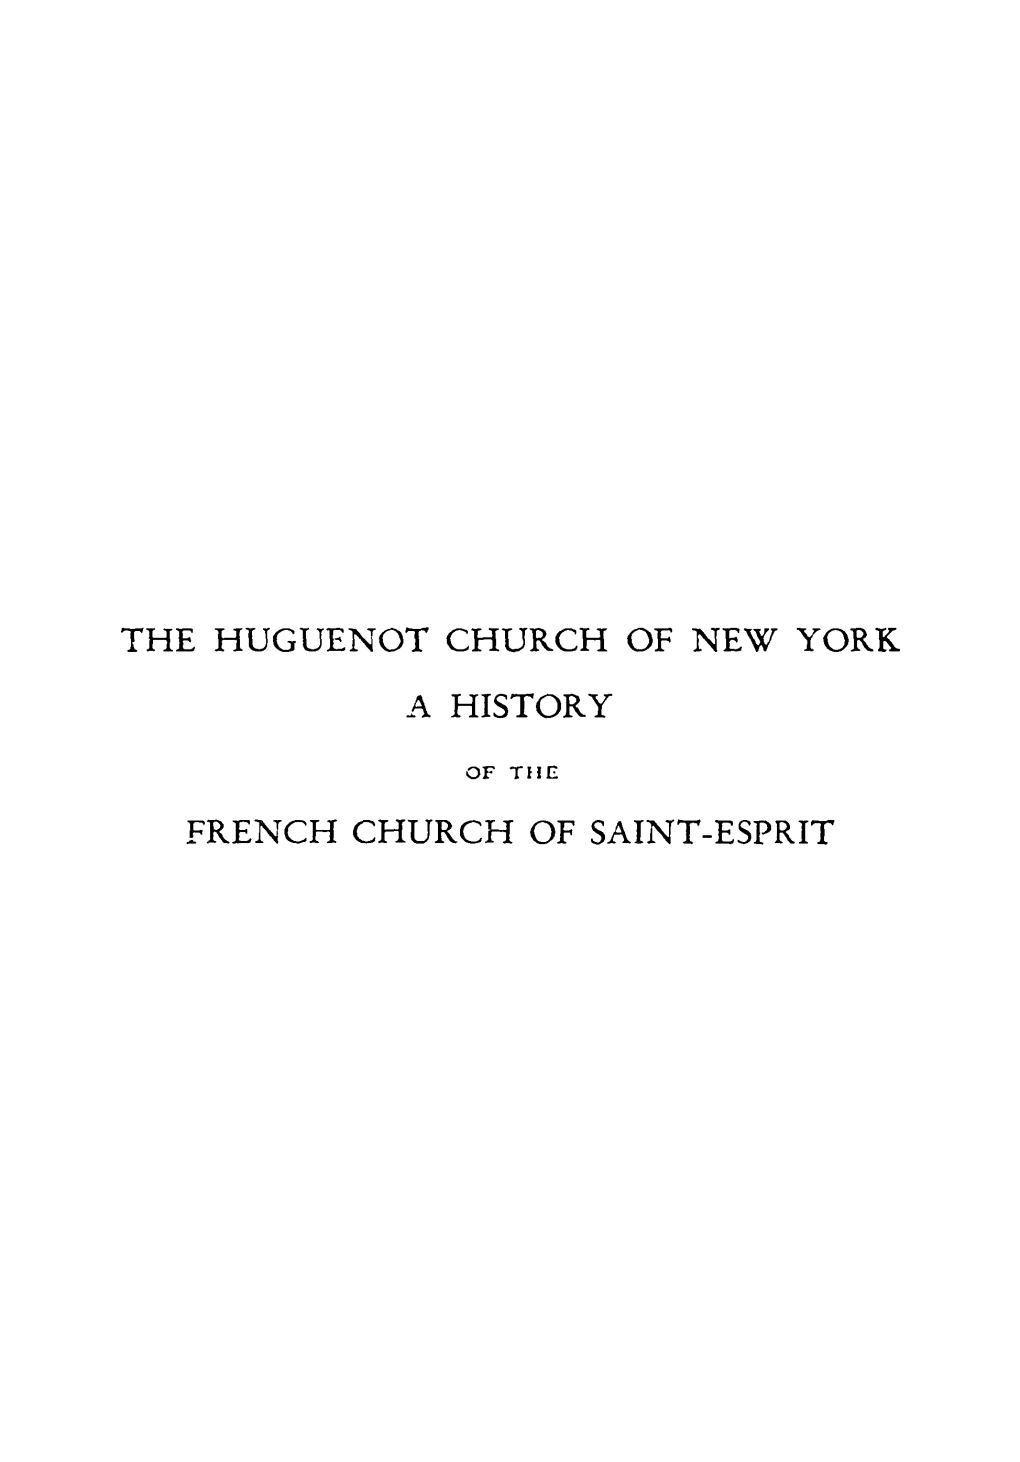 THE HUGUENOT CHURCH of NEW YORK L\. HISTORY FRENCH